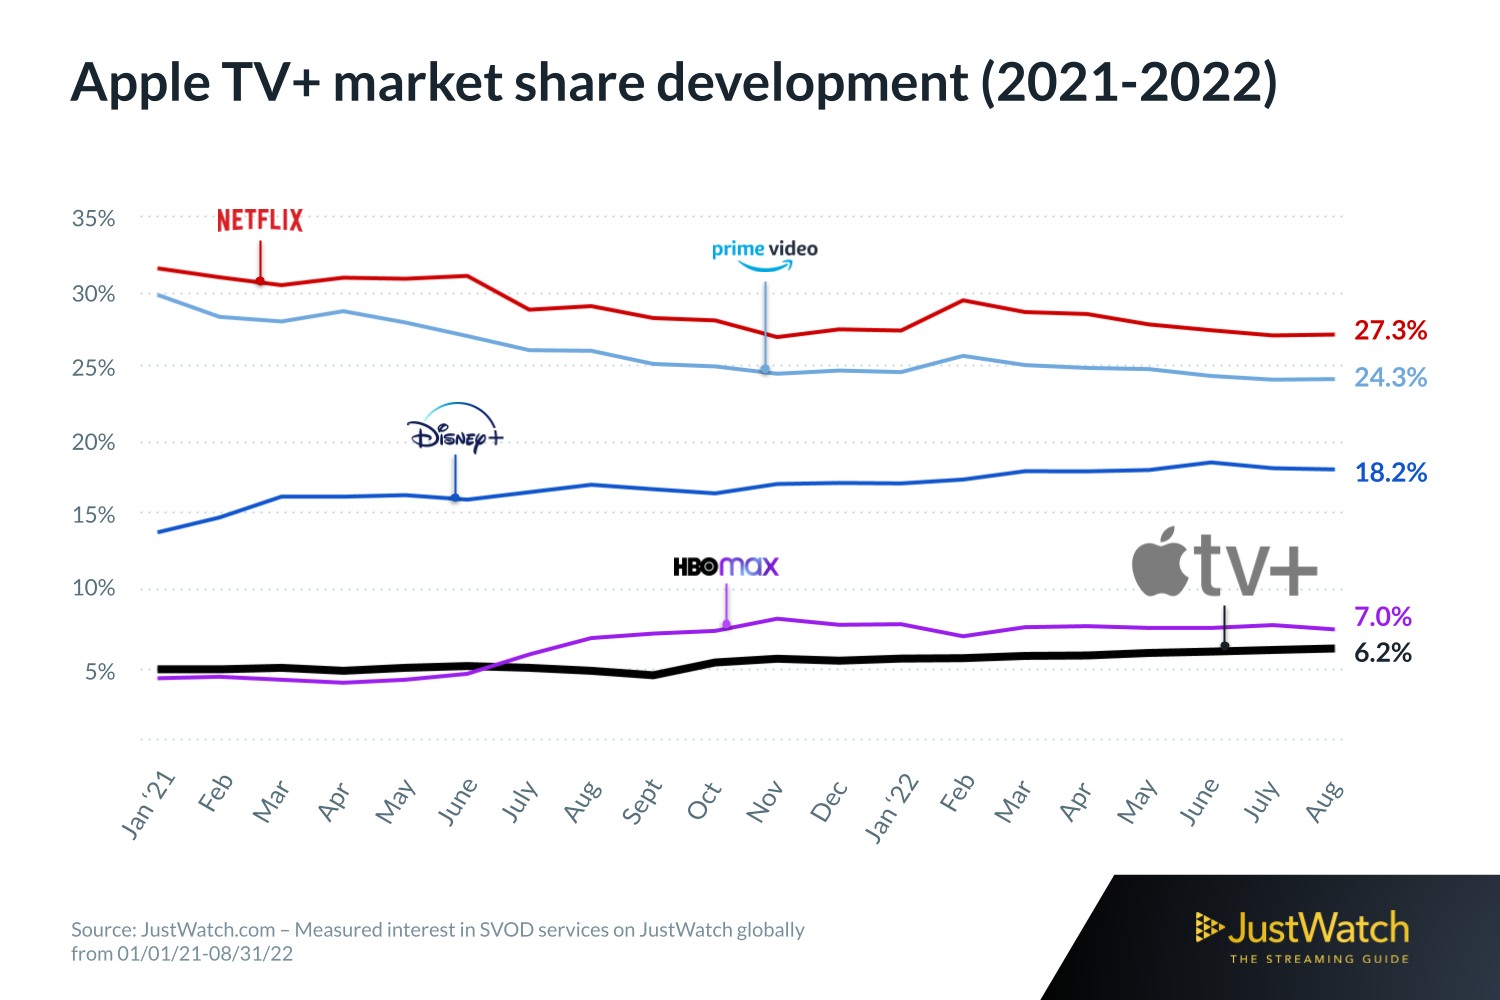 Apple TV+ global market share surpasses 6% while competitors lose subscribers.